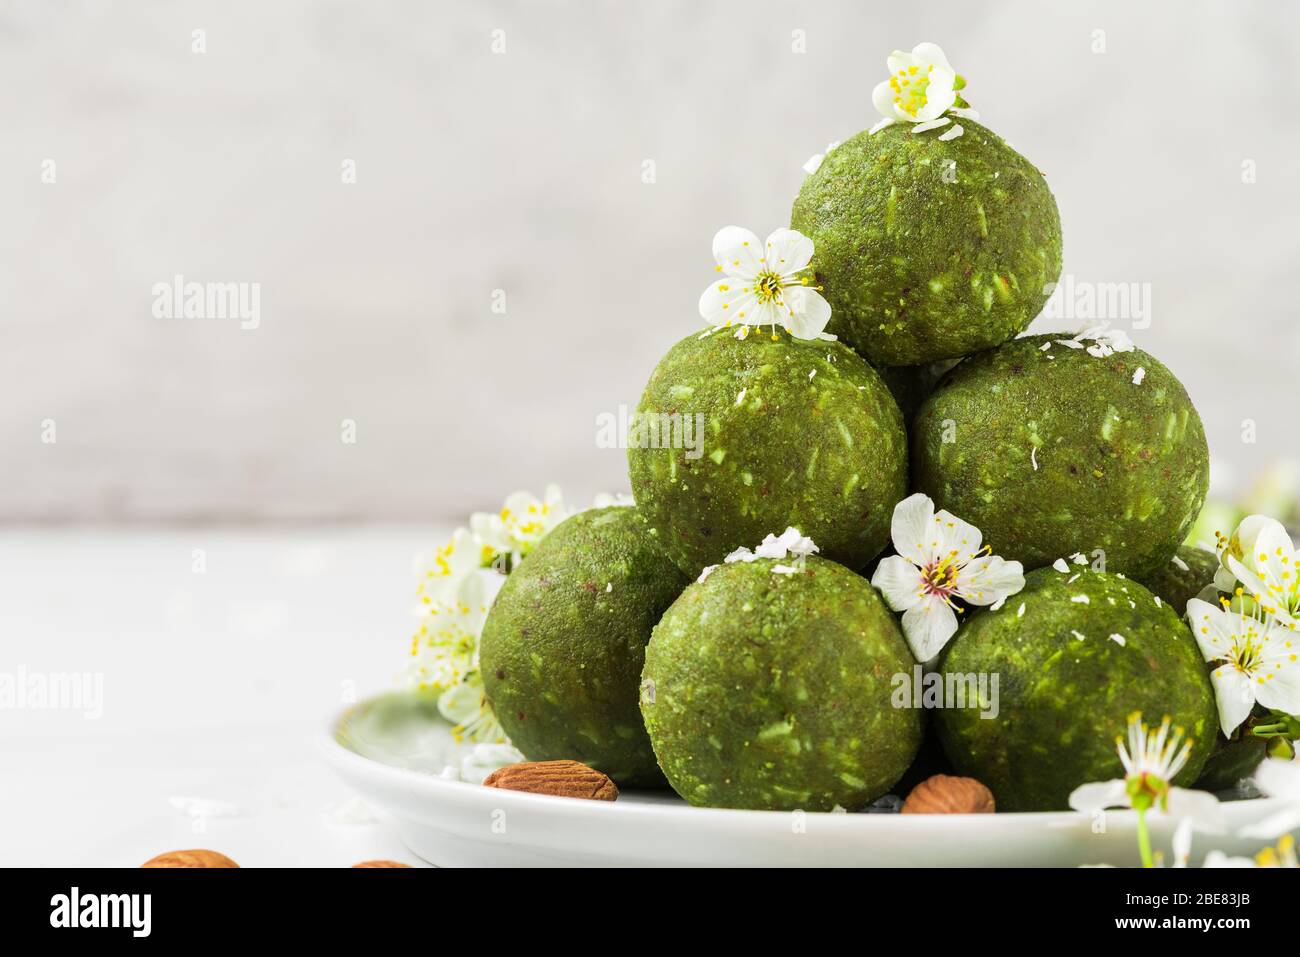 Raw vegan energy balls made of matcha tea, dates and nuts with spring blossom flowers. Food styling. Healthy vegan dessert. close up with copy space Stock Photo